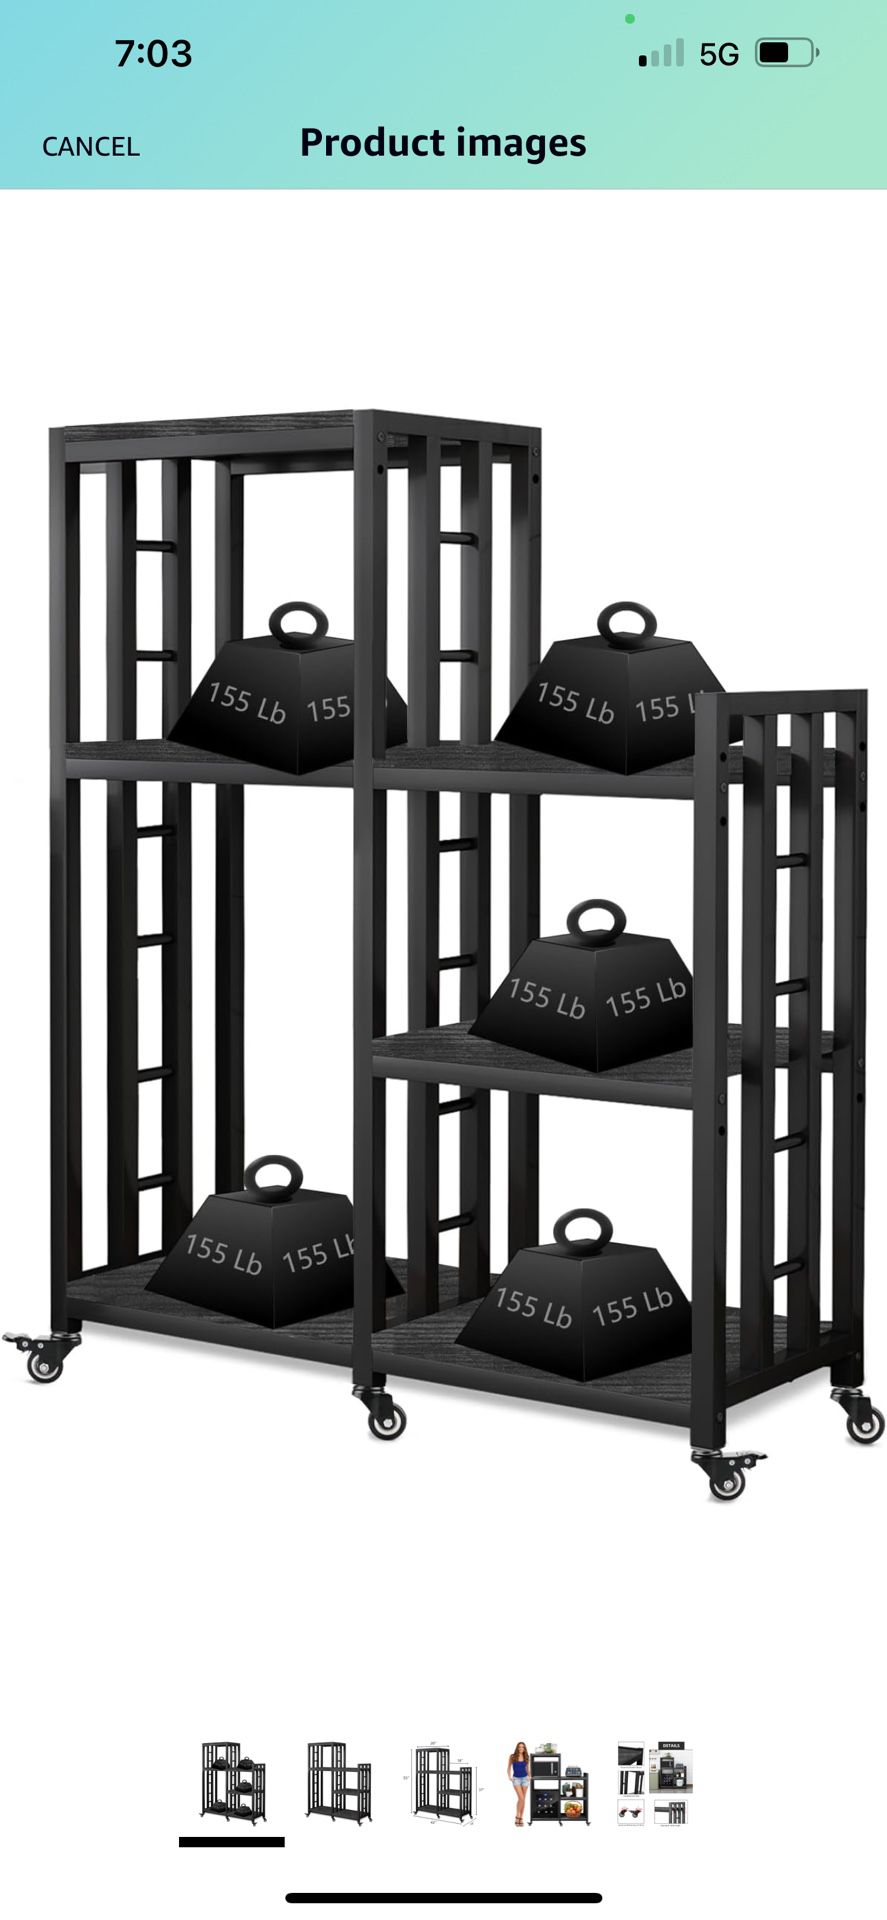 Multi-Purpose Storage Shelf Baker Rack with Wheels - Ideal Microwave Stand, Coffee Bar Table, and 6-Tier Storage Rack for Spices, Pots, Pans, Mini Fri